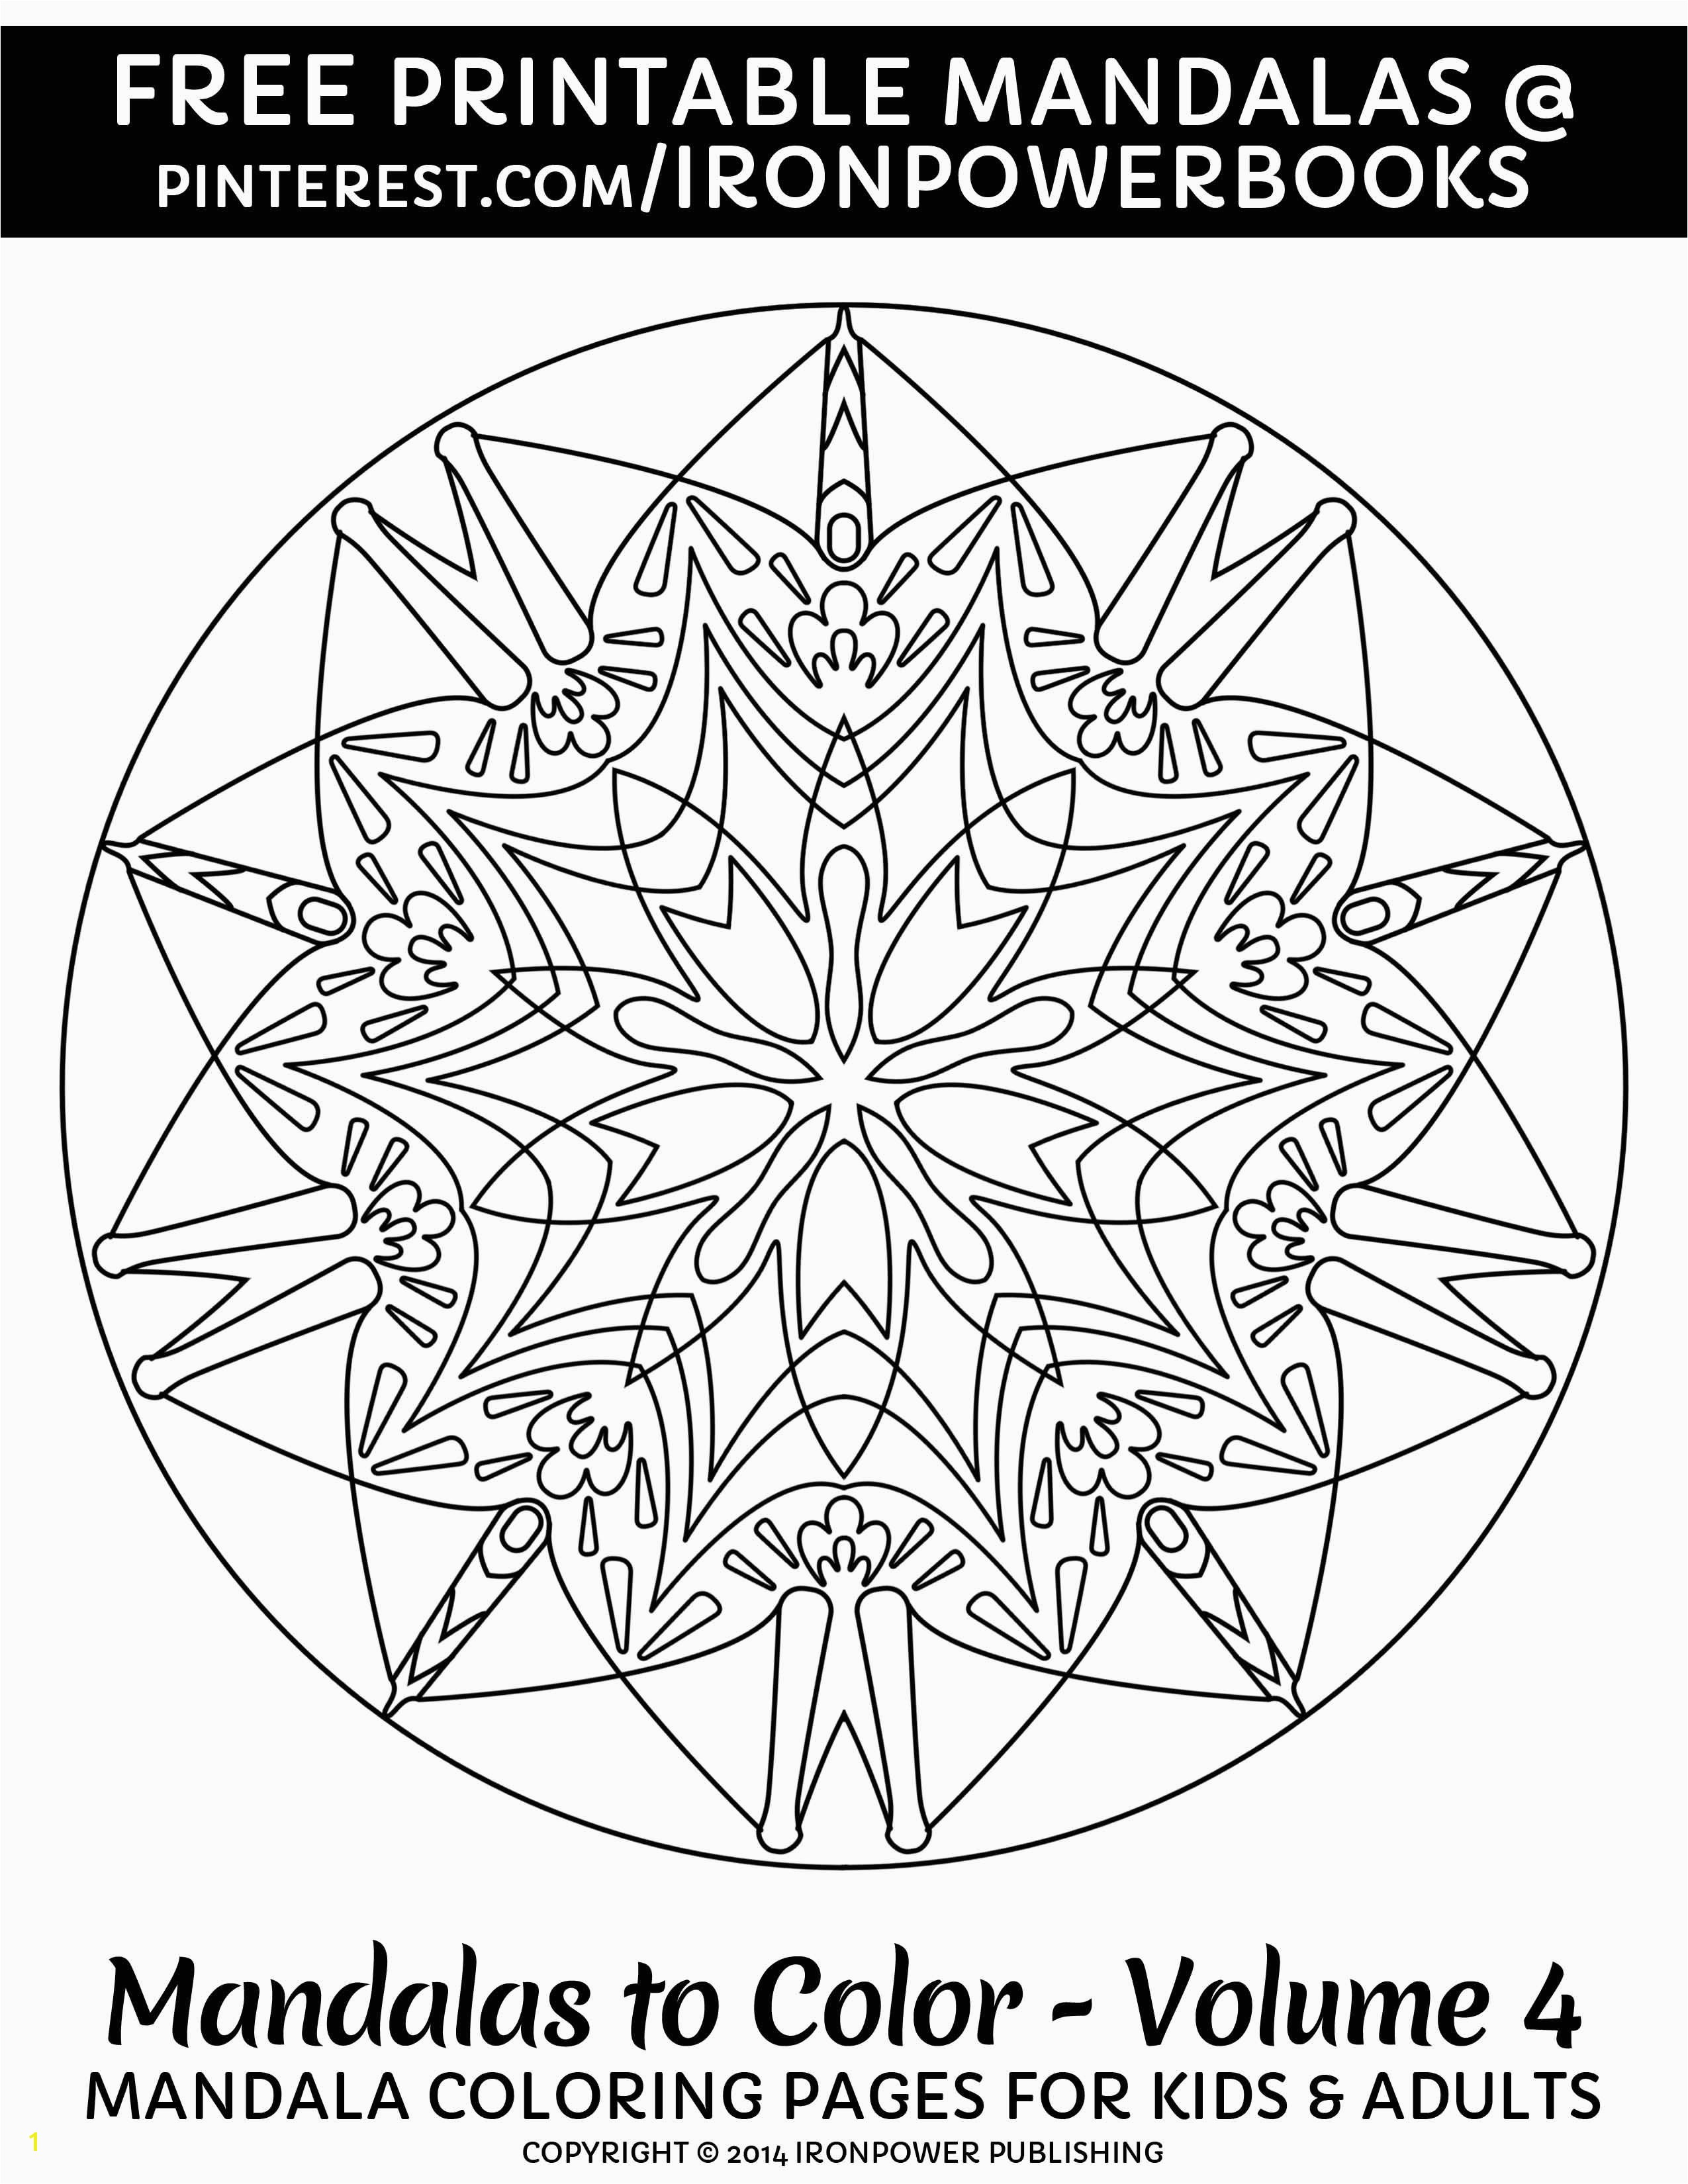 Mandala Coloring Pages Free Online Coloring Mandala Coloring Book Mindful Mandalas Coloring Book